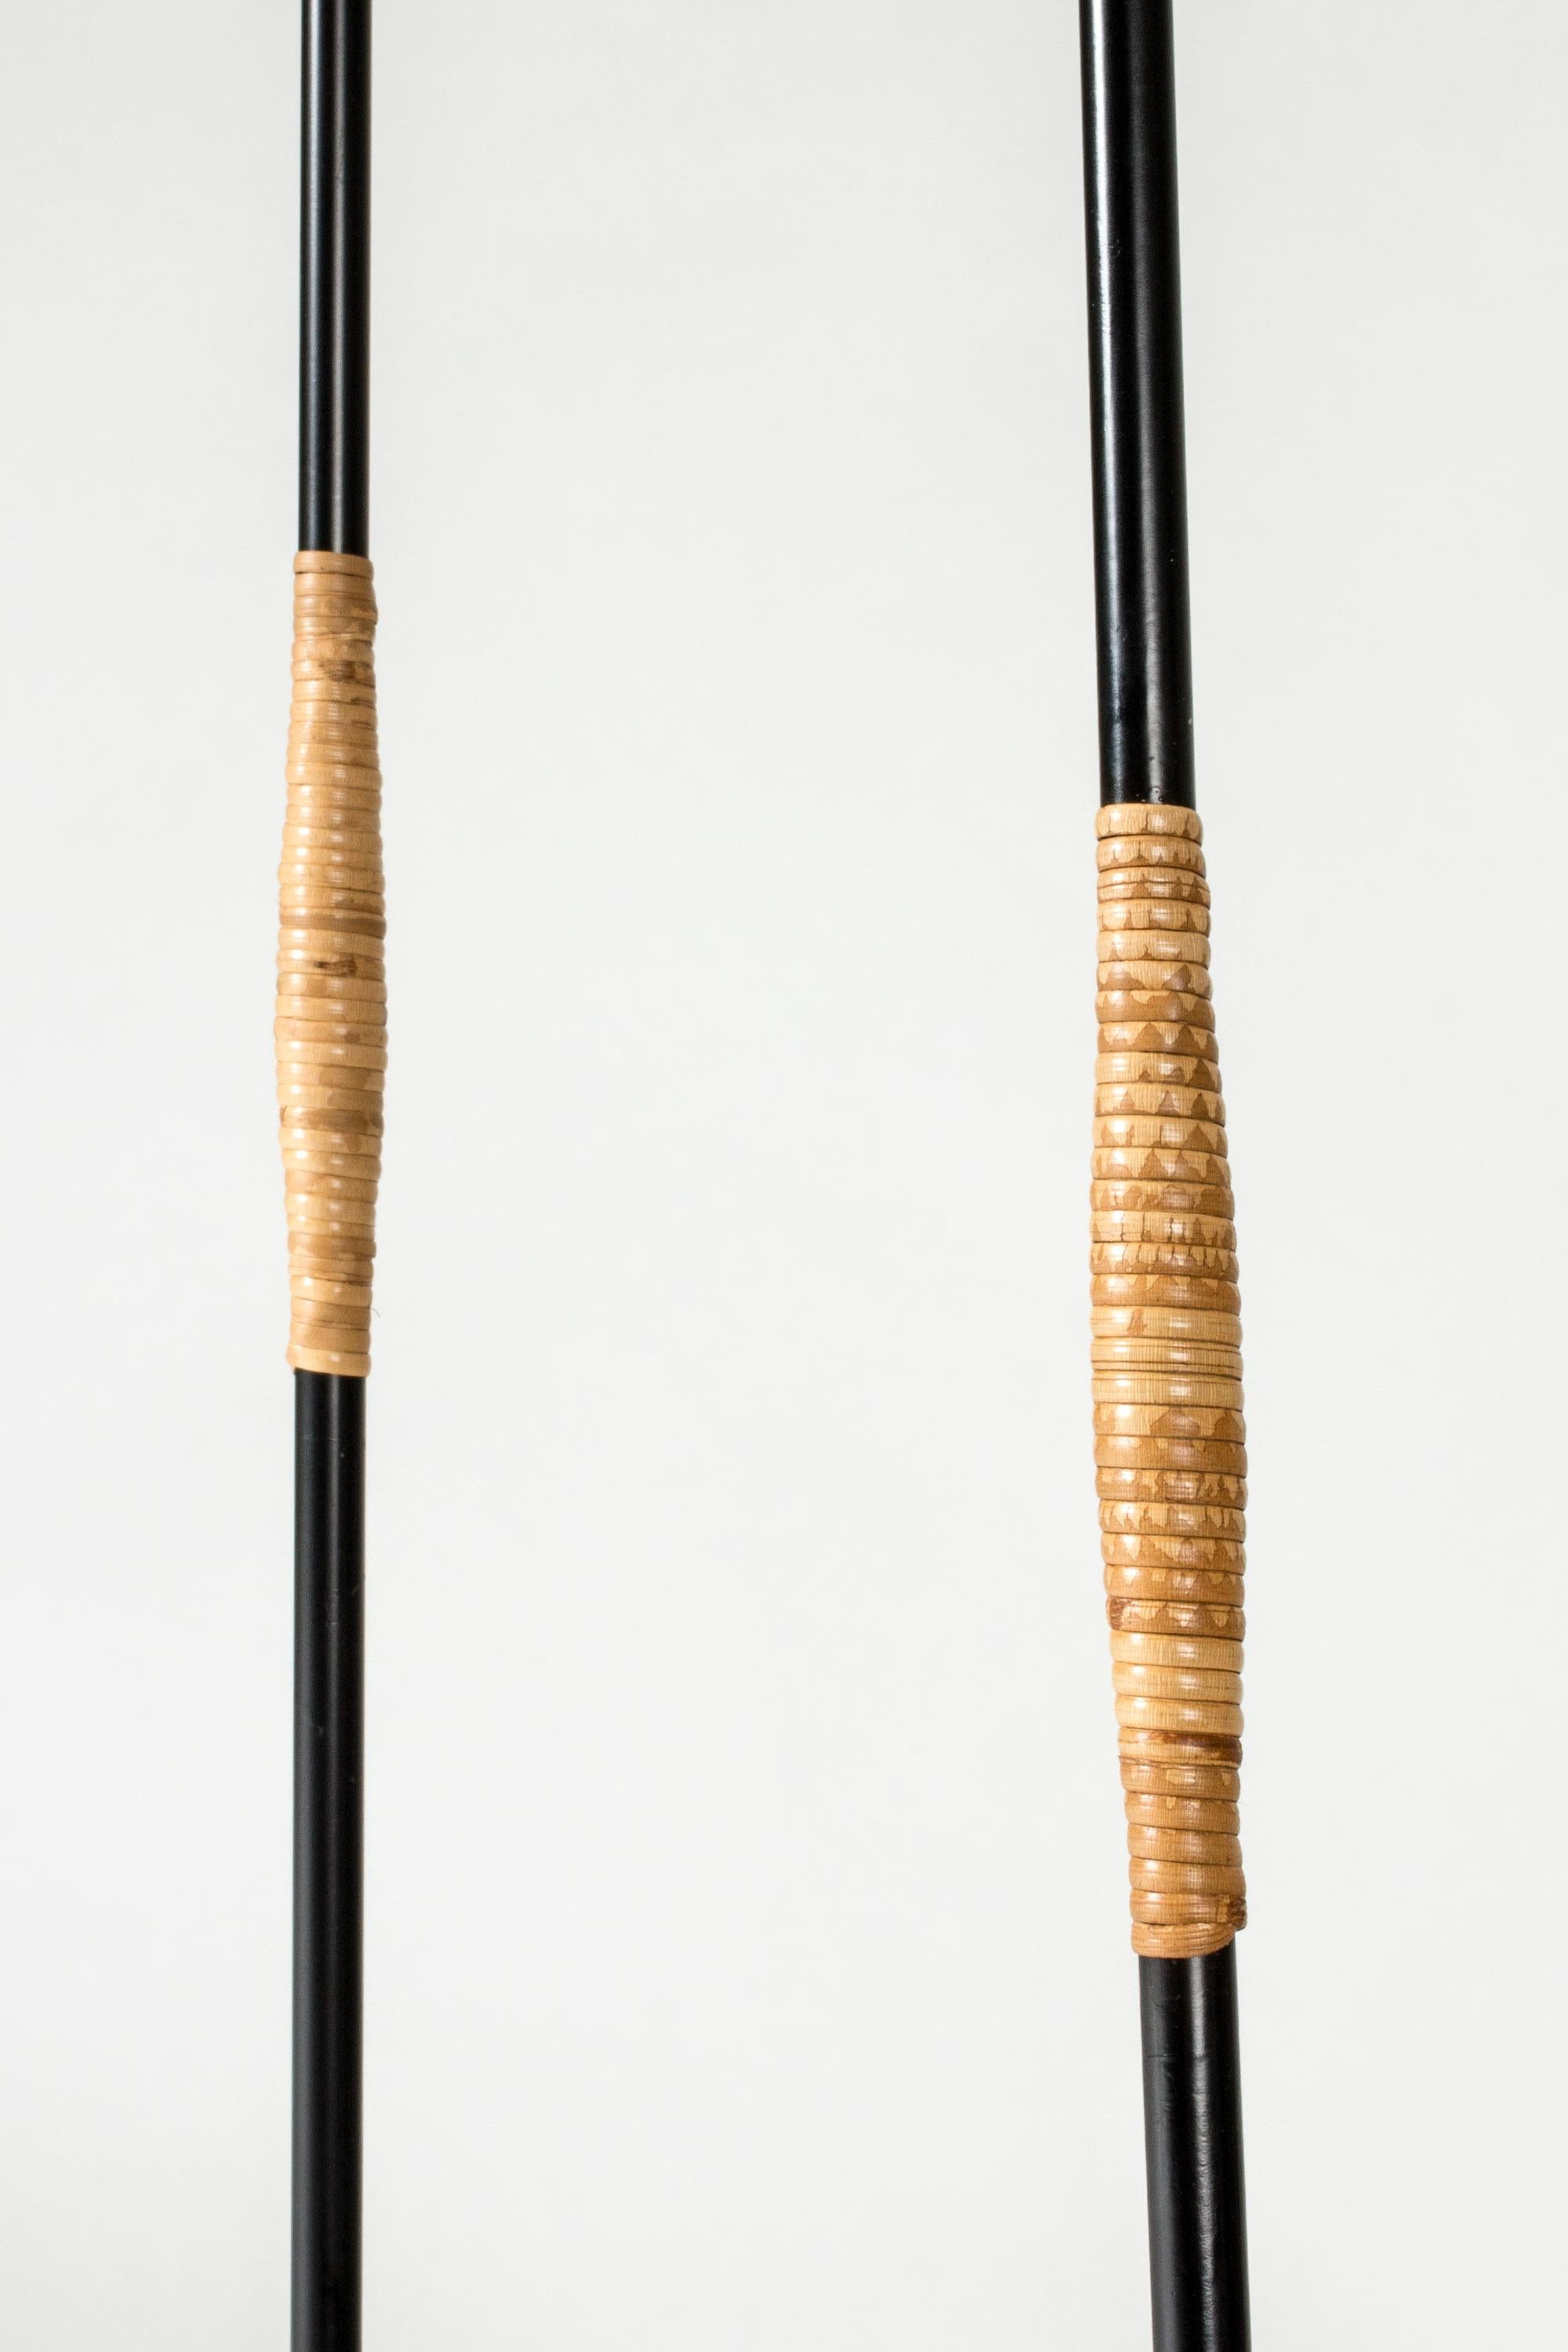 Mid-20th Century Pair of Modernist floor lamps by Svend Aage Holm Sørensen, Denmark, 1950s For Sale